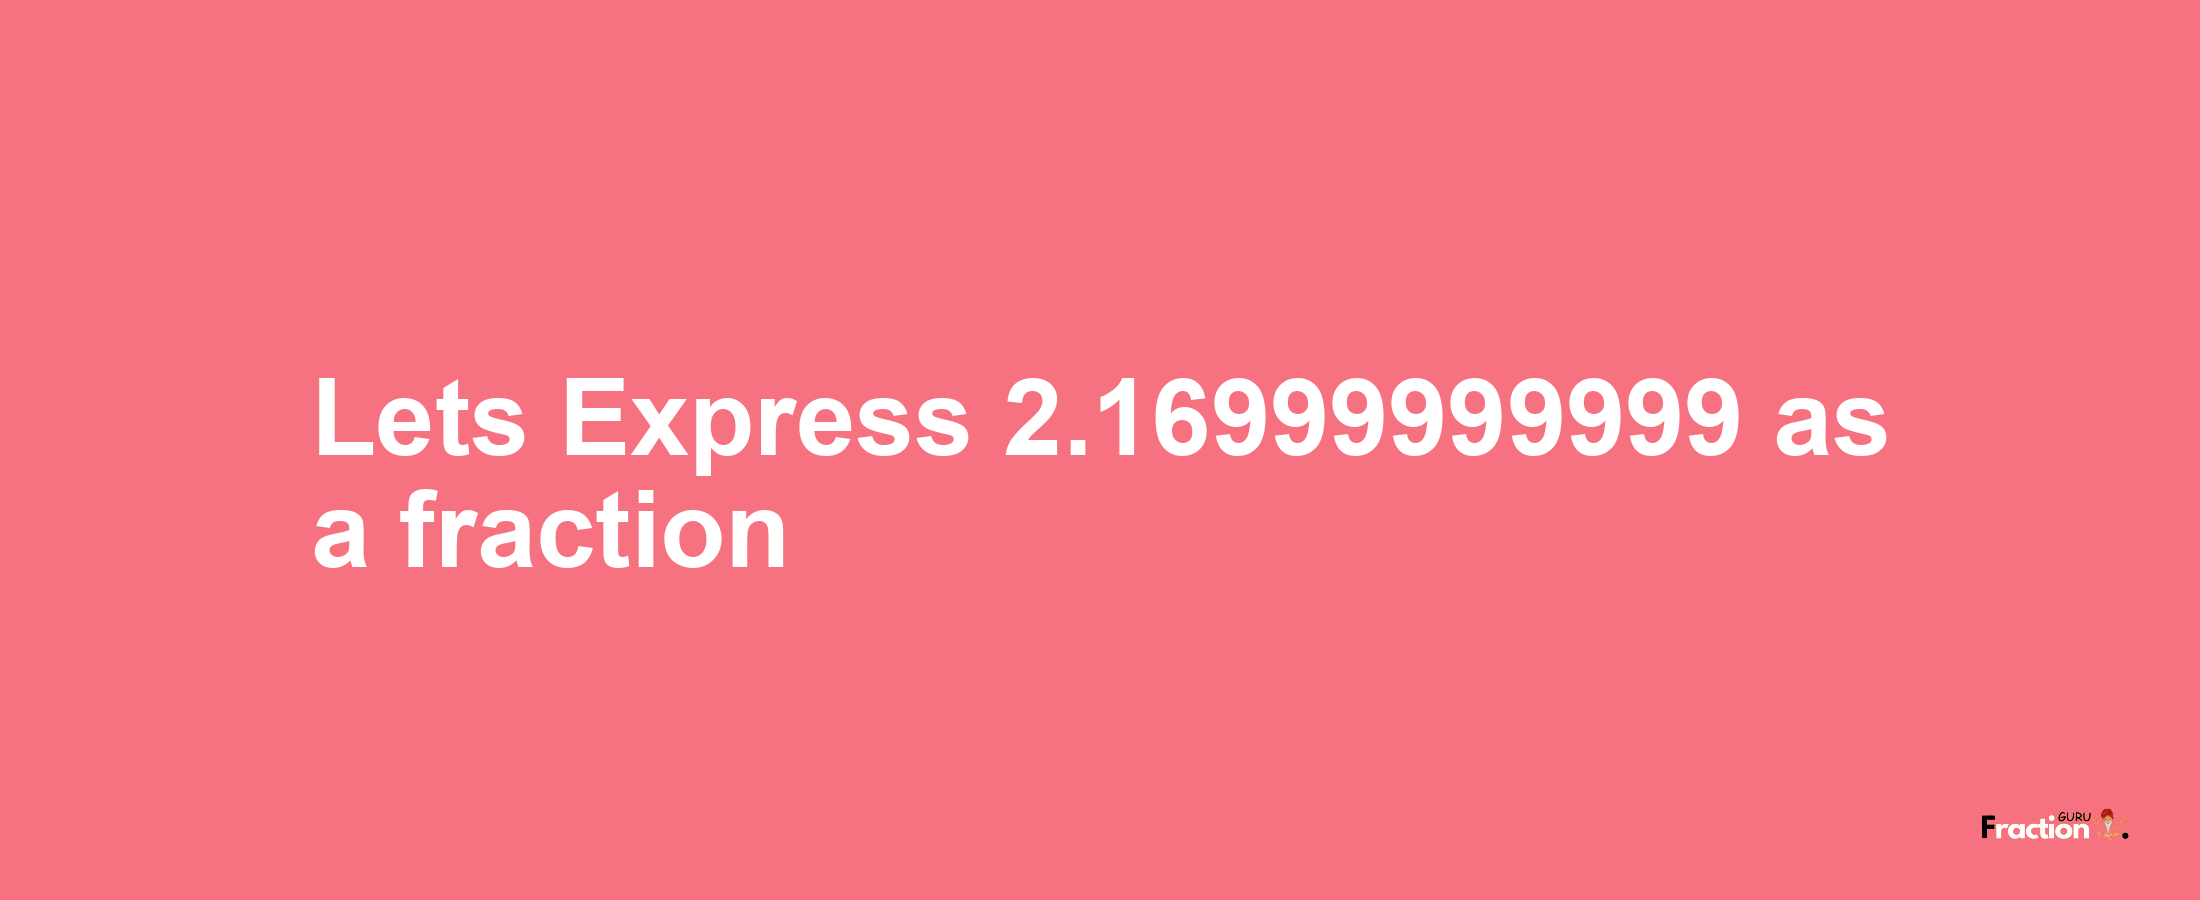 Lets Express 2.16999999999 as afraction